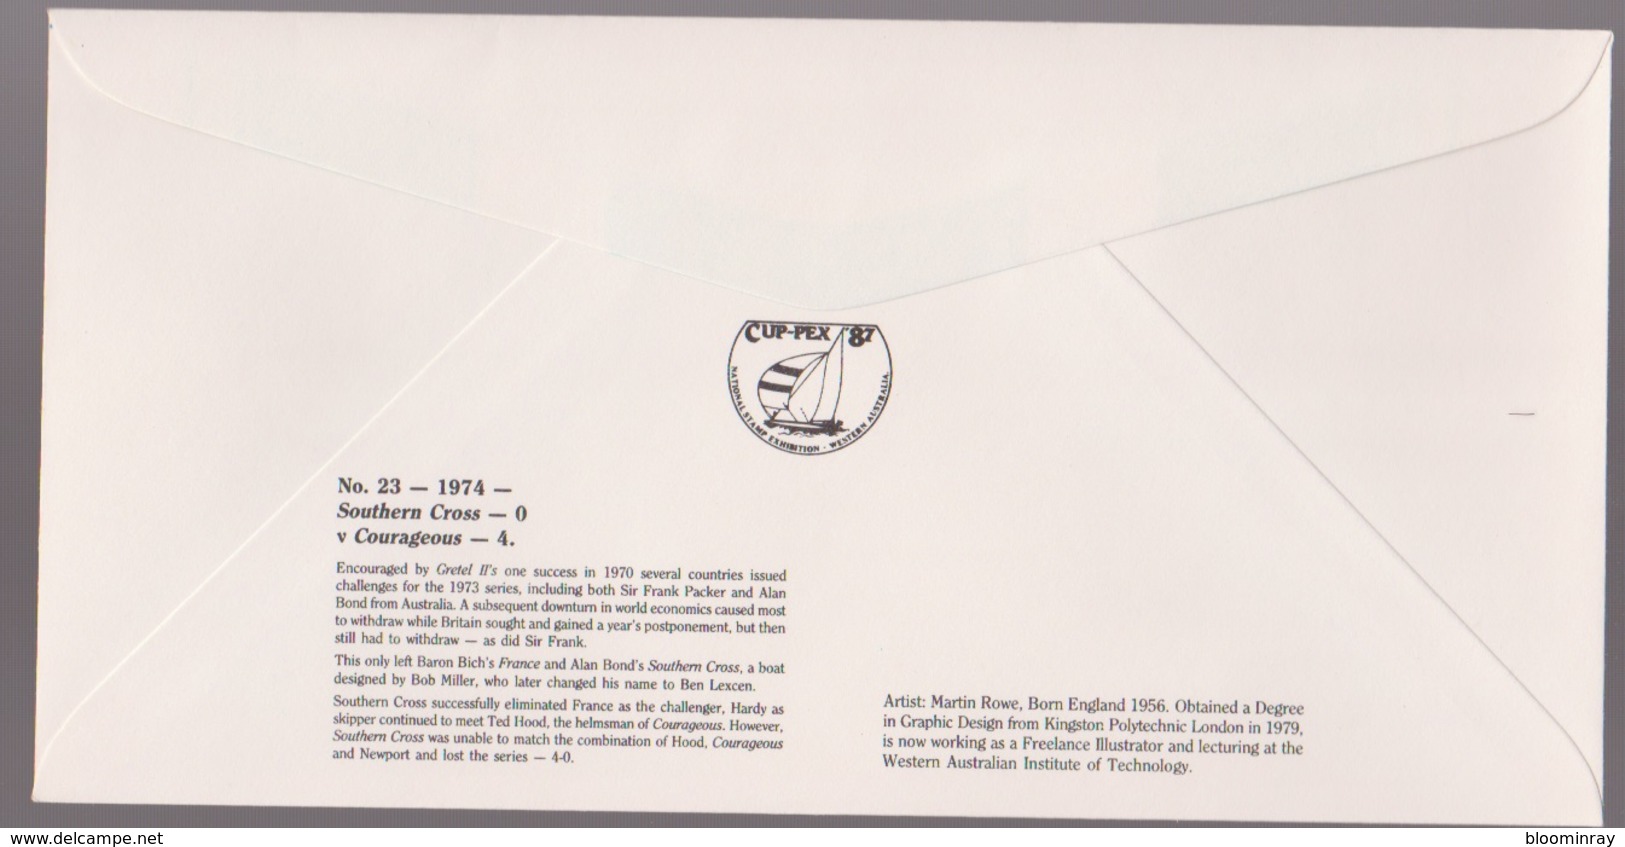 Australia Cup-pex Americas Cup # 23 Series 1974 Southern Cross V Courageous Cover - FDC